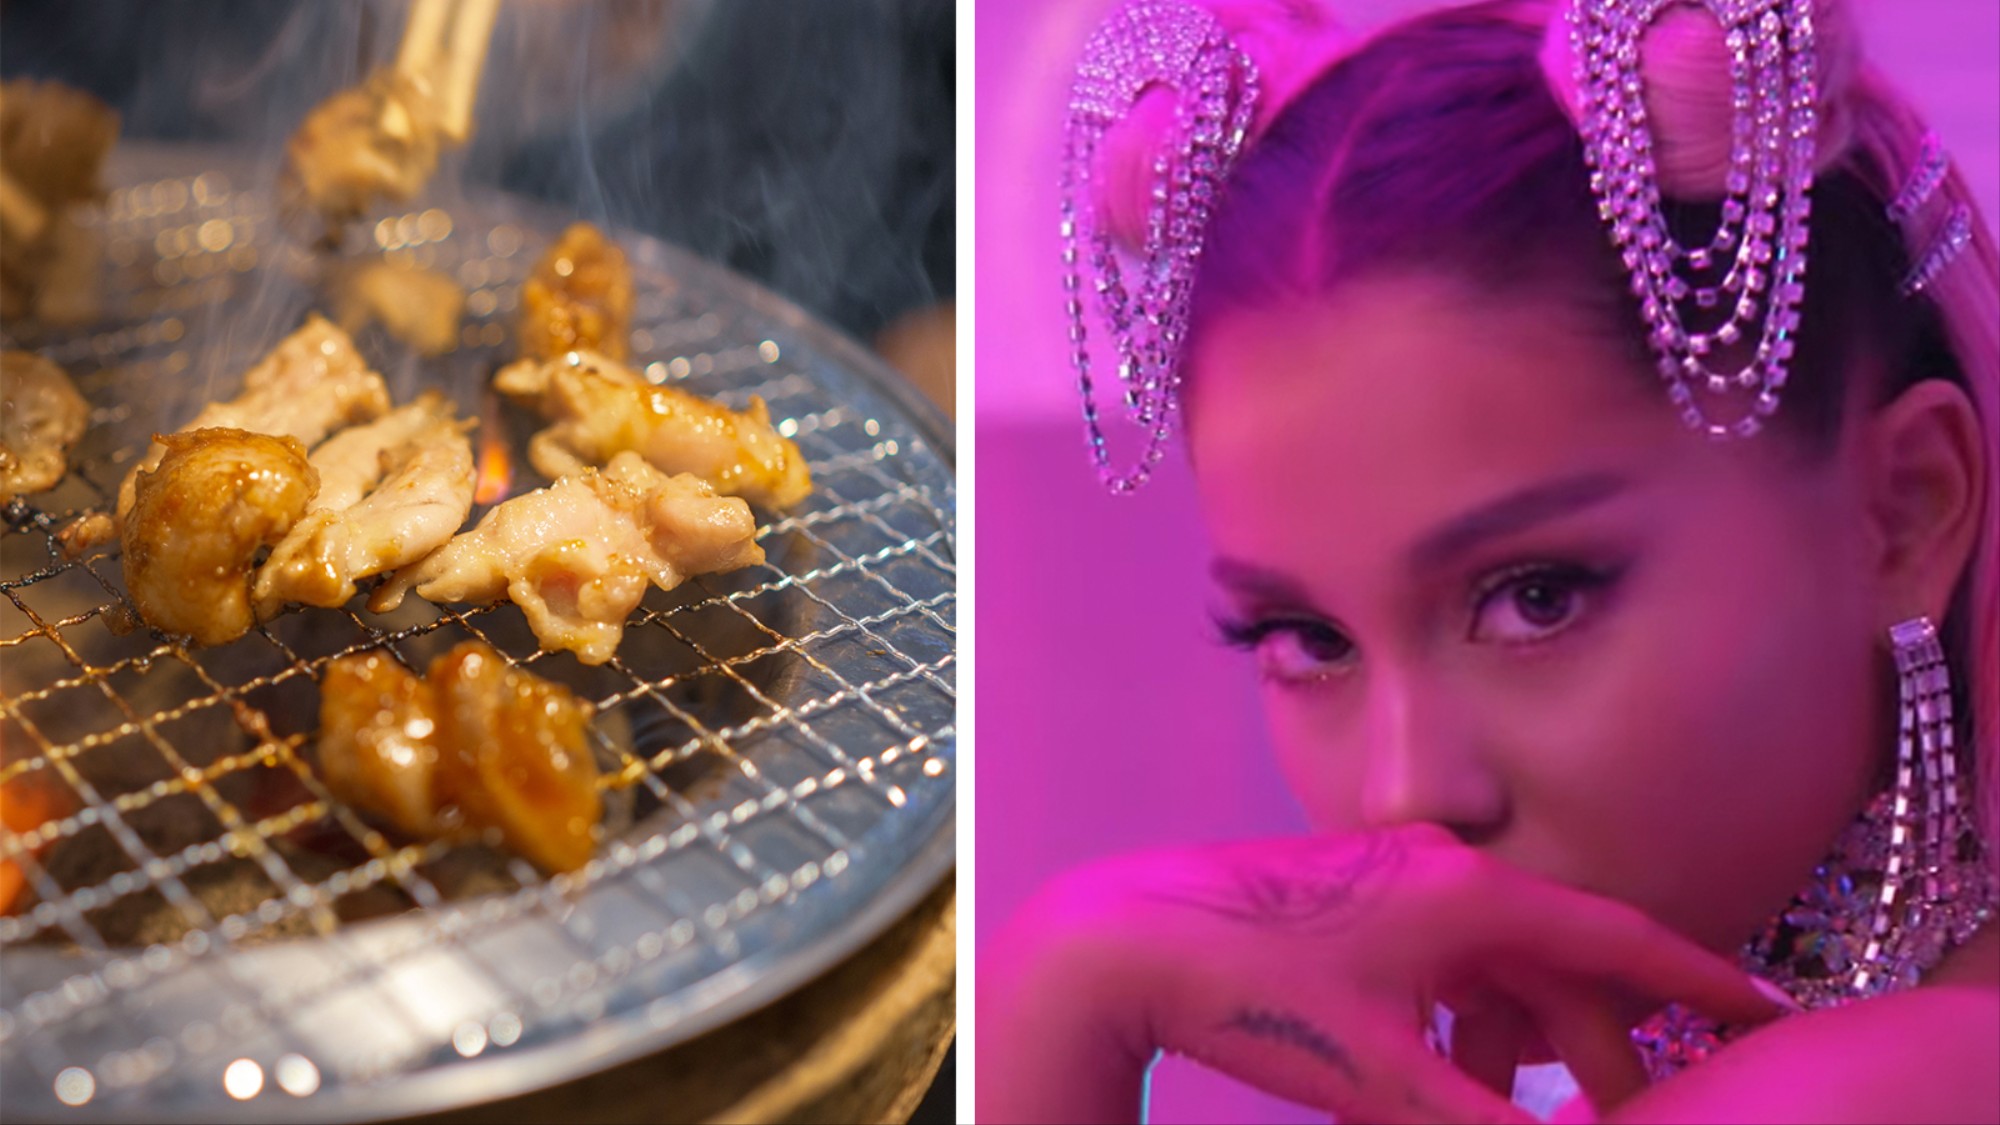 Ariana Grandes New Japanese 7 Rings Tattoo Actually Says